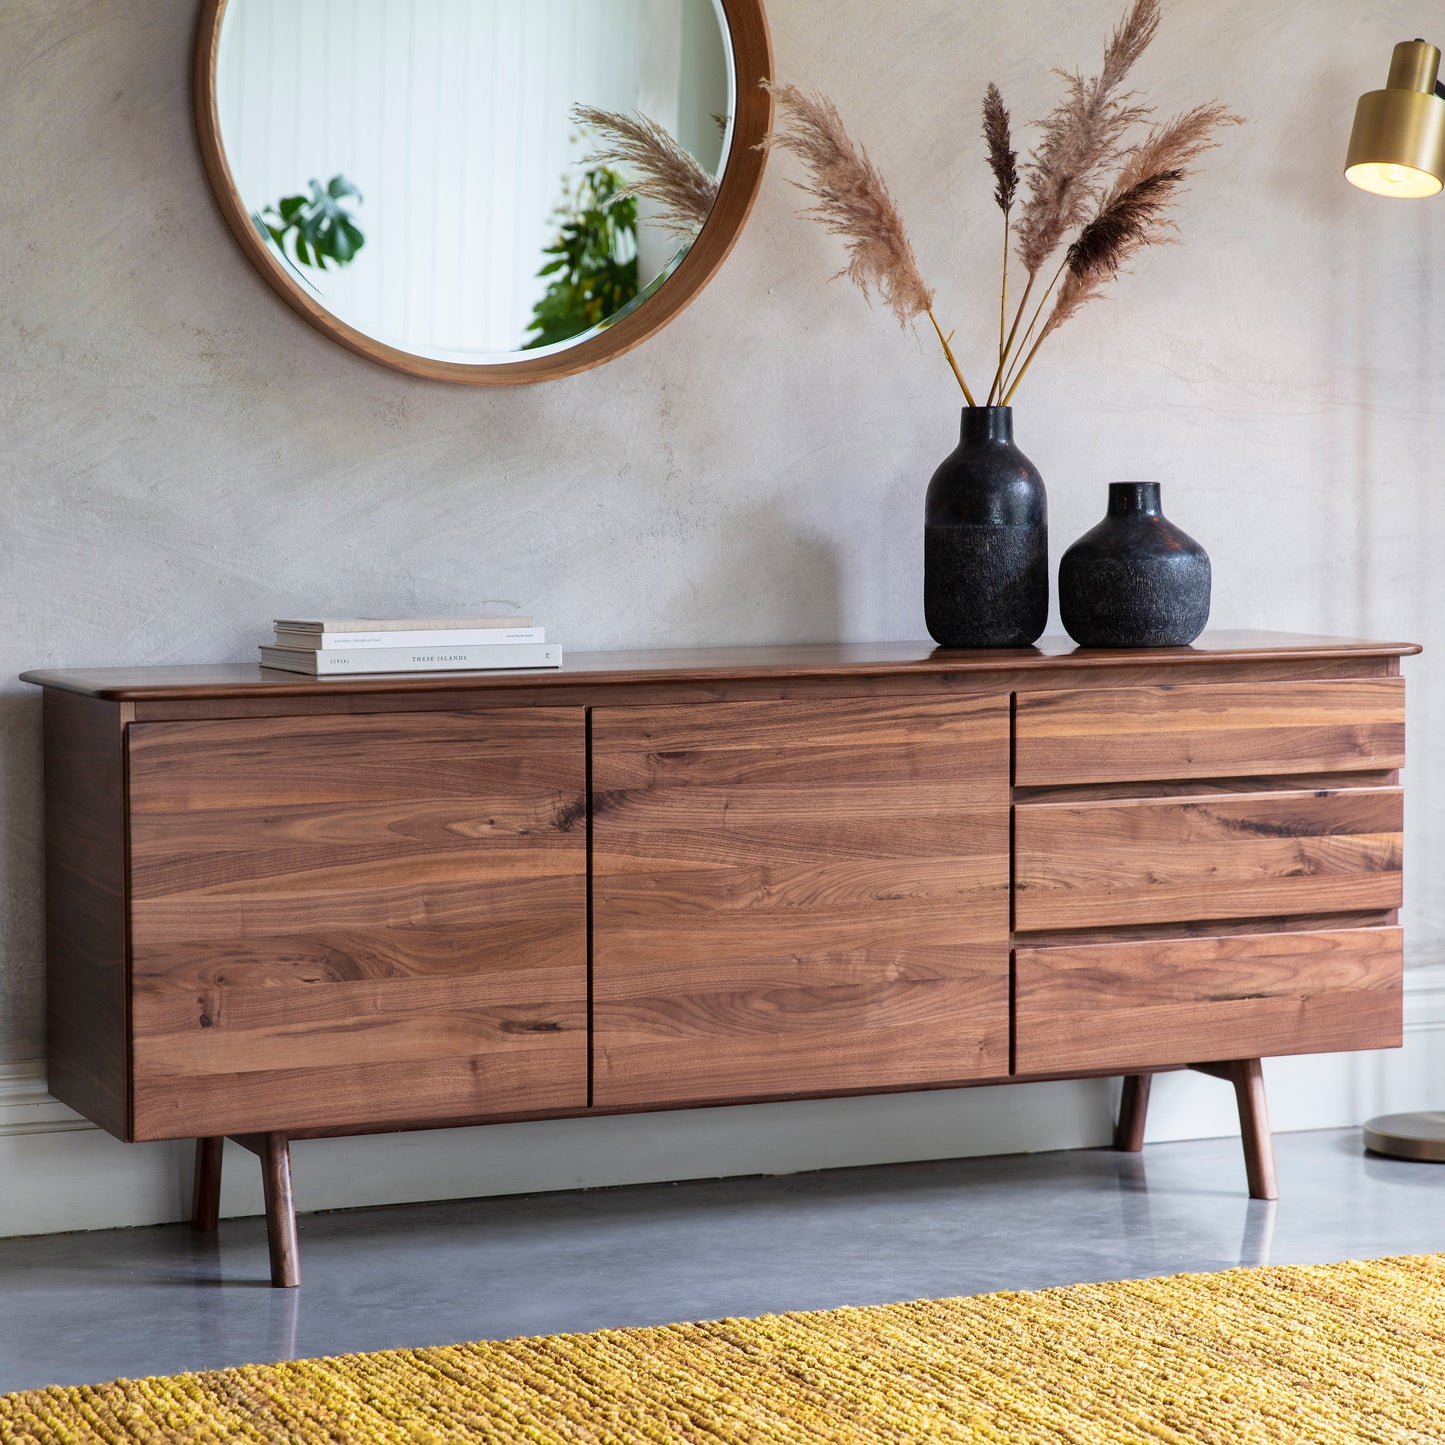 A Walnut Sideboard by Kikiathome.co.uk in a room with a mirror, enhancing the interior decor with its elegant design and functionality.